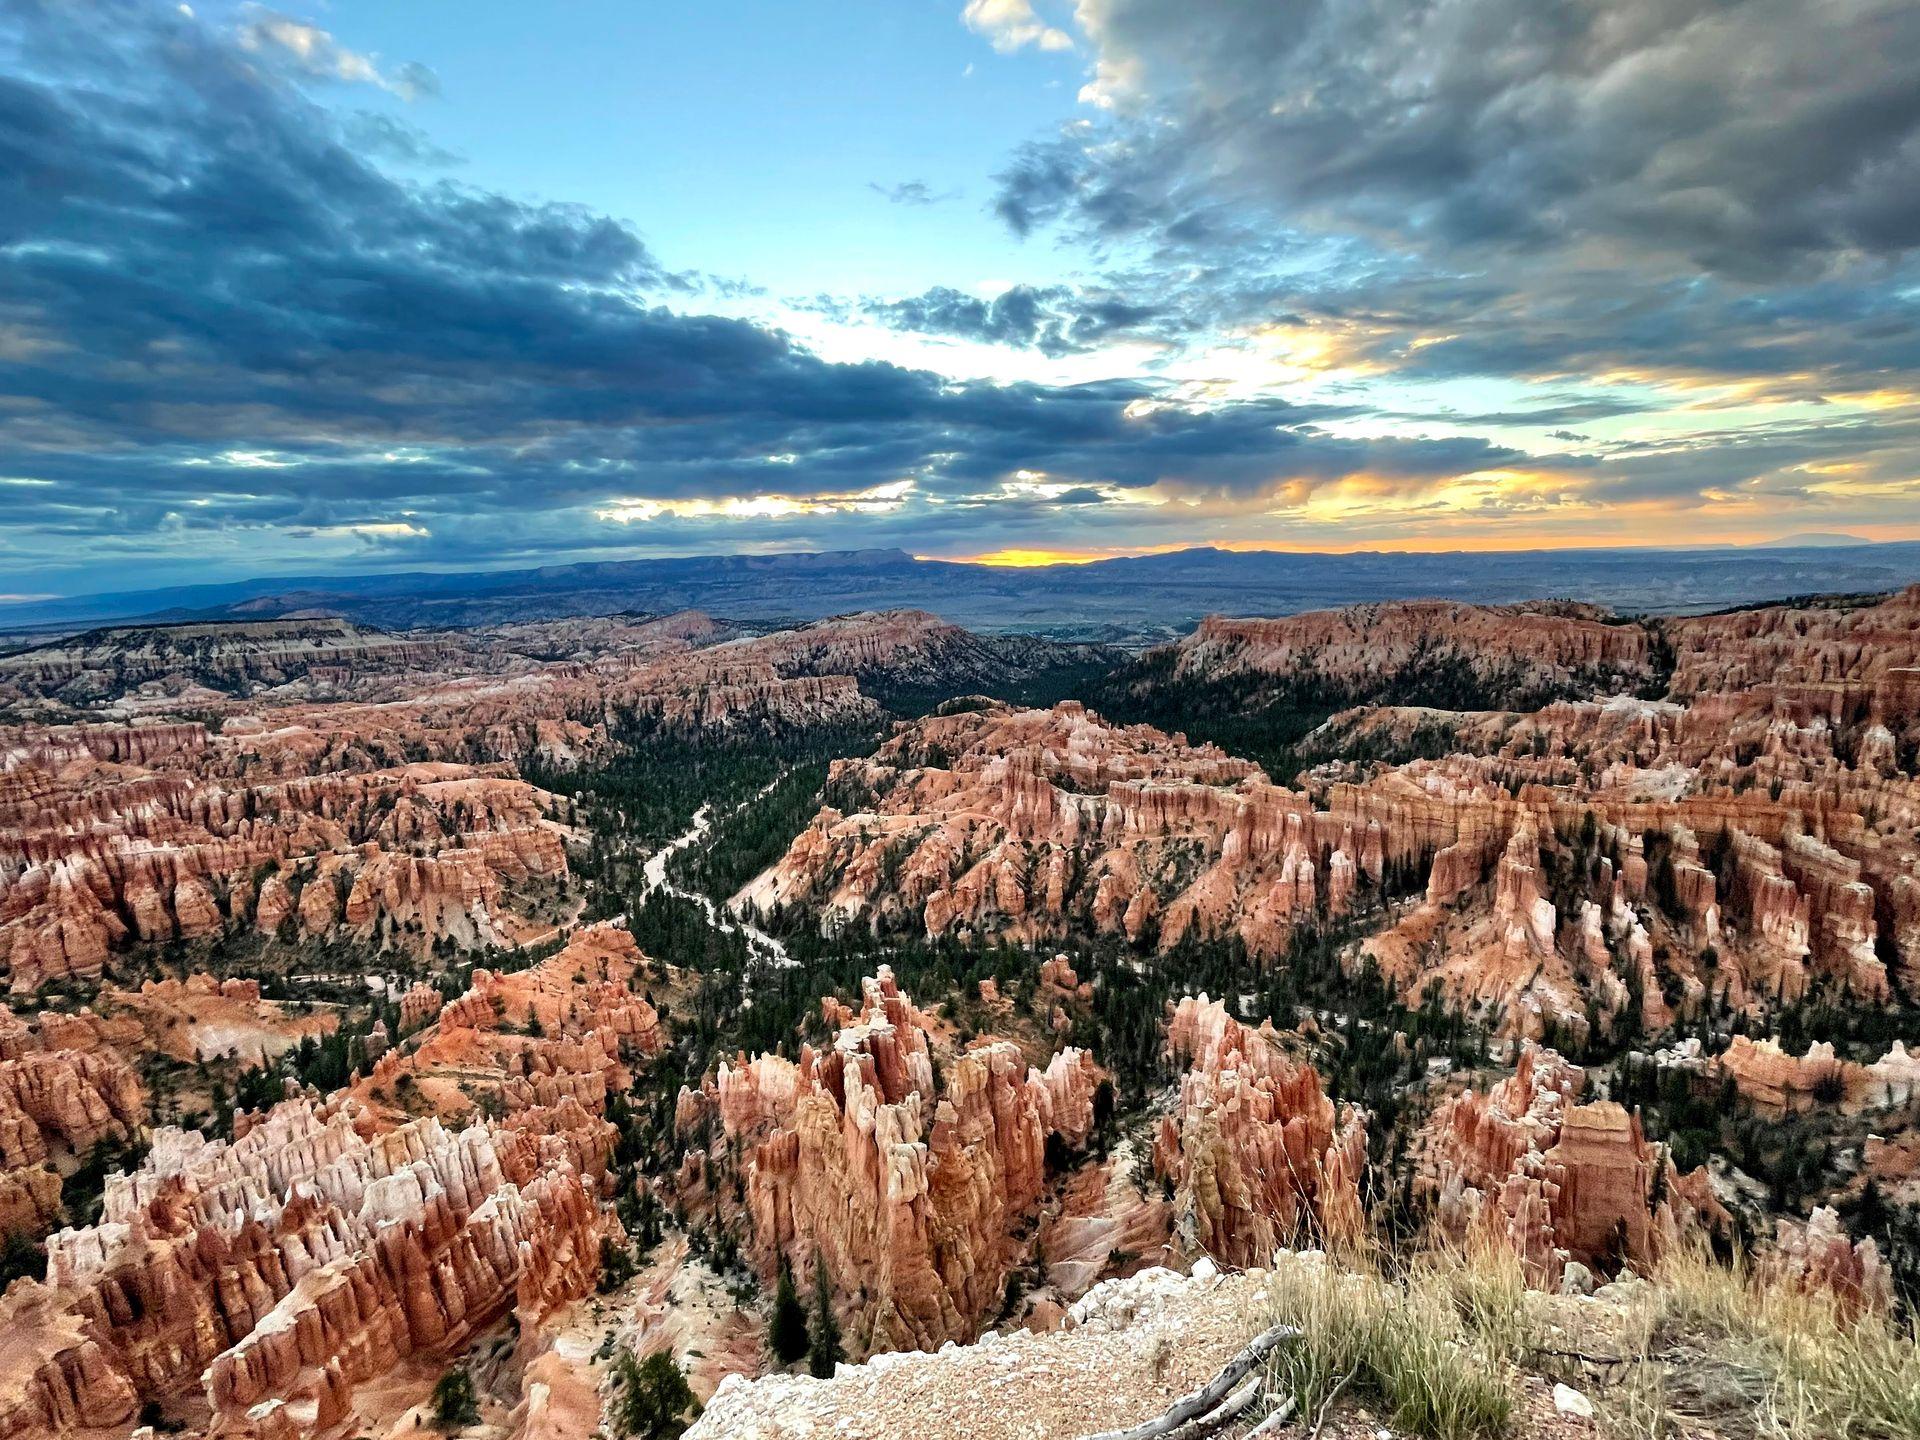 A wide view of many hoodoos from Inspiration Point. It is sunrise and the sky is yellow and orange. You can see a trail through the hoodoos.